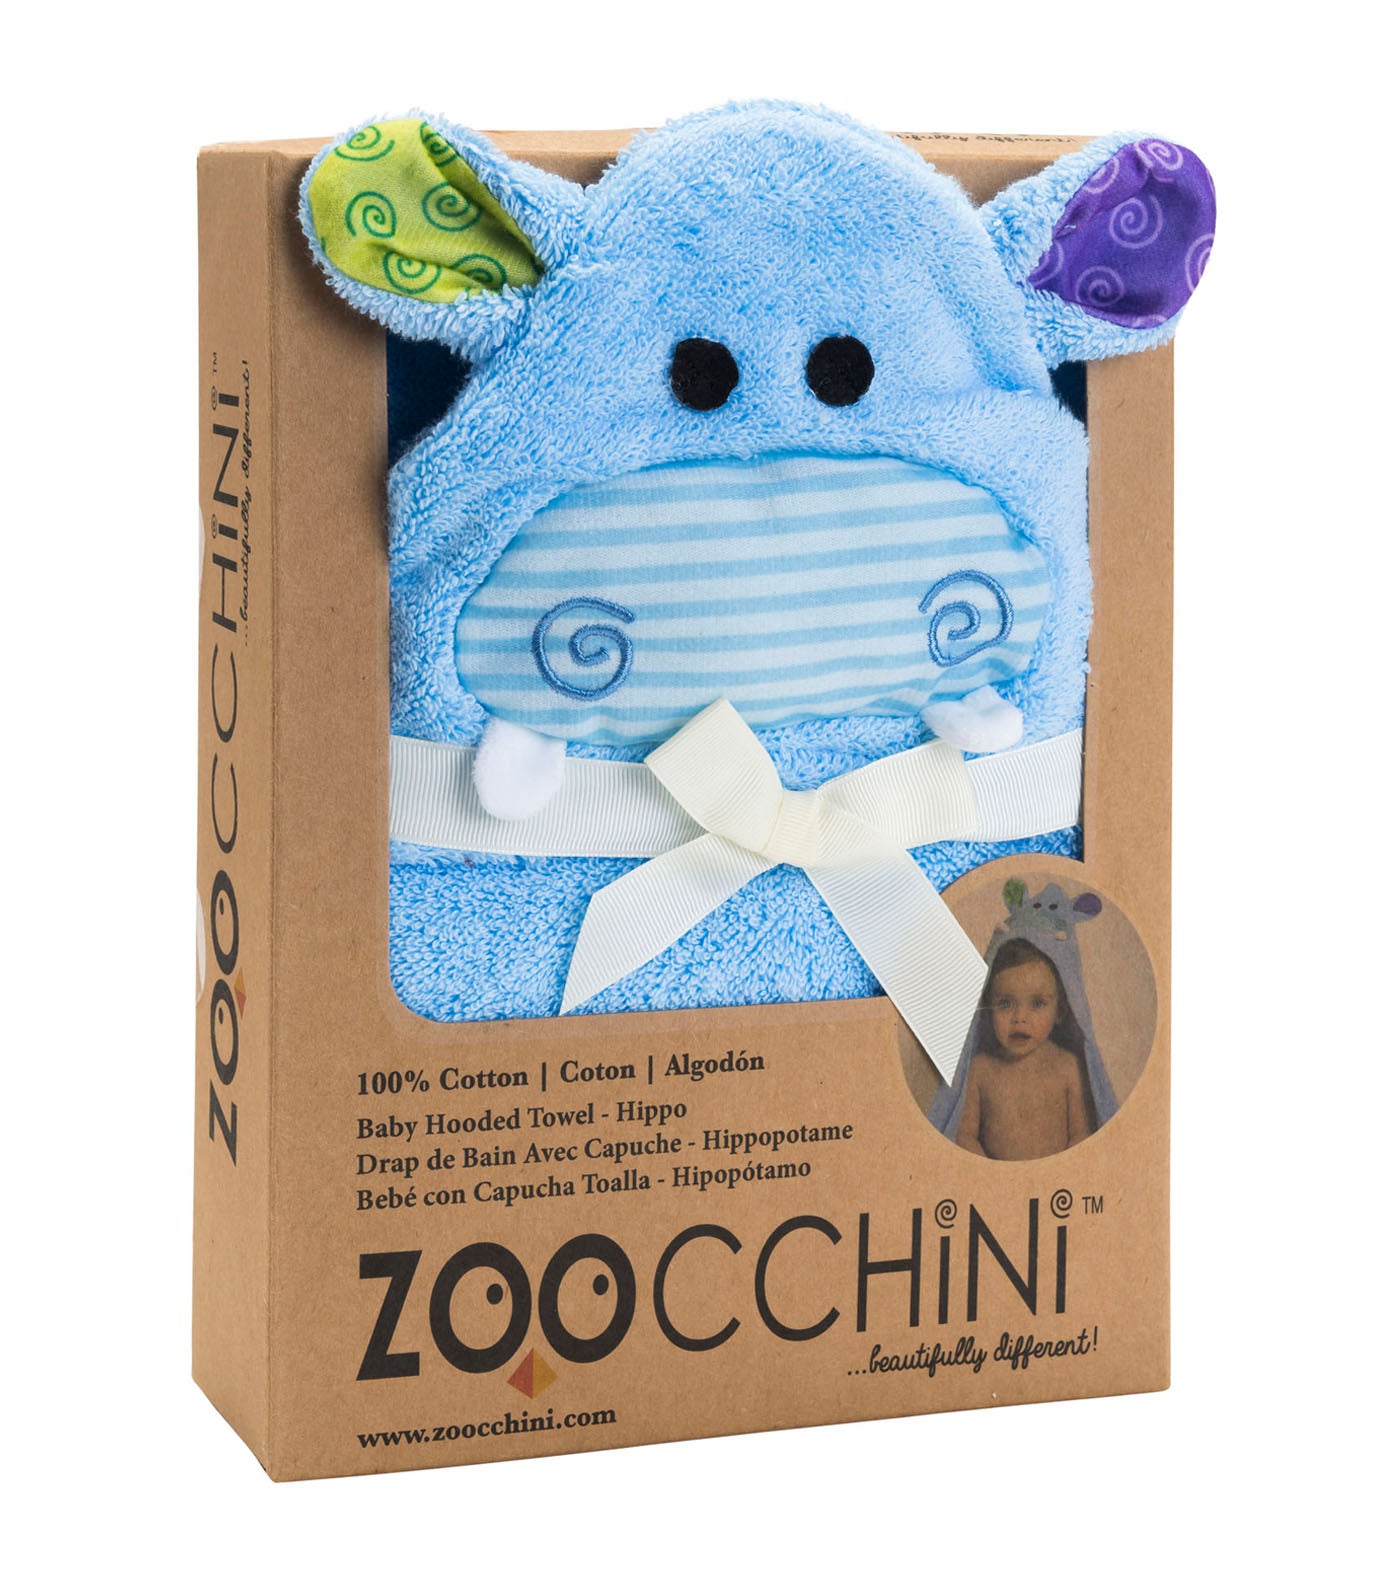 zoocchini blue baby hooded towel - henry the hippo